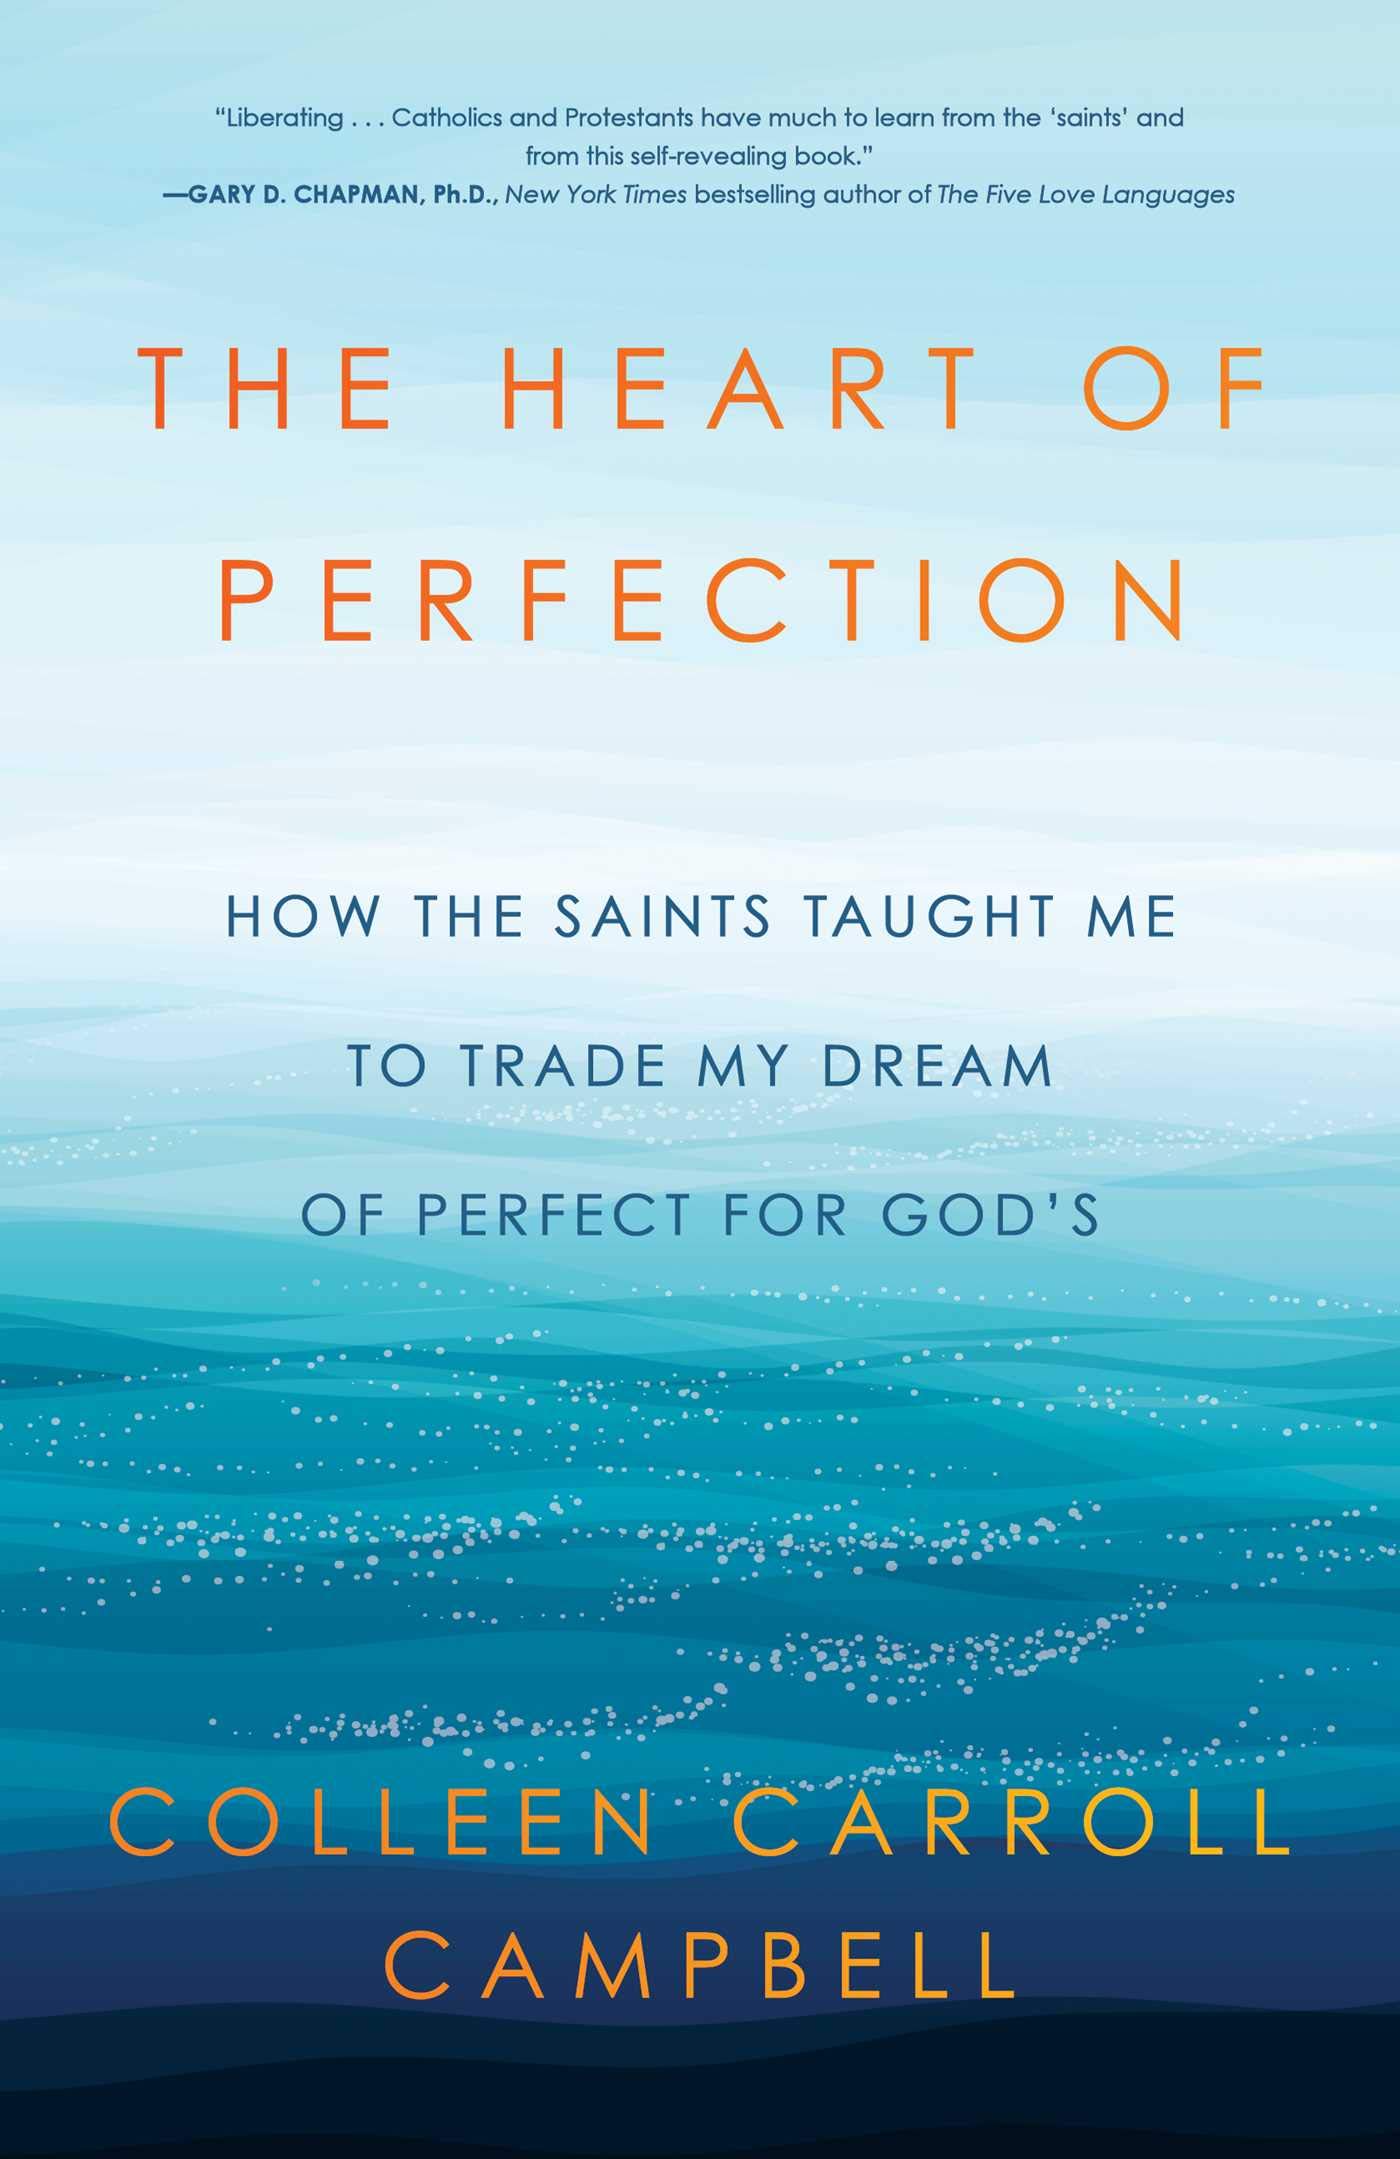 The Heart of Perfection: How the Saints Taught Me to Trade My Dream of Perfect for God's